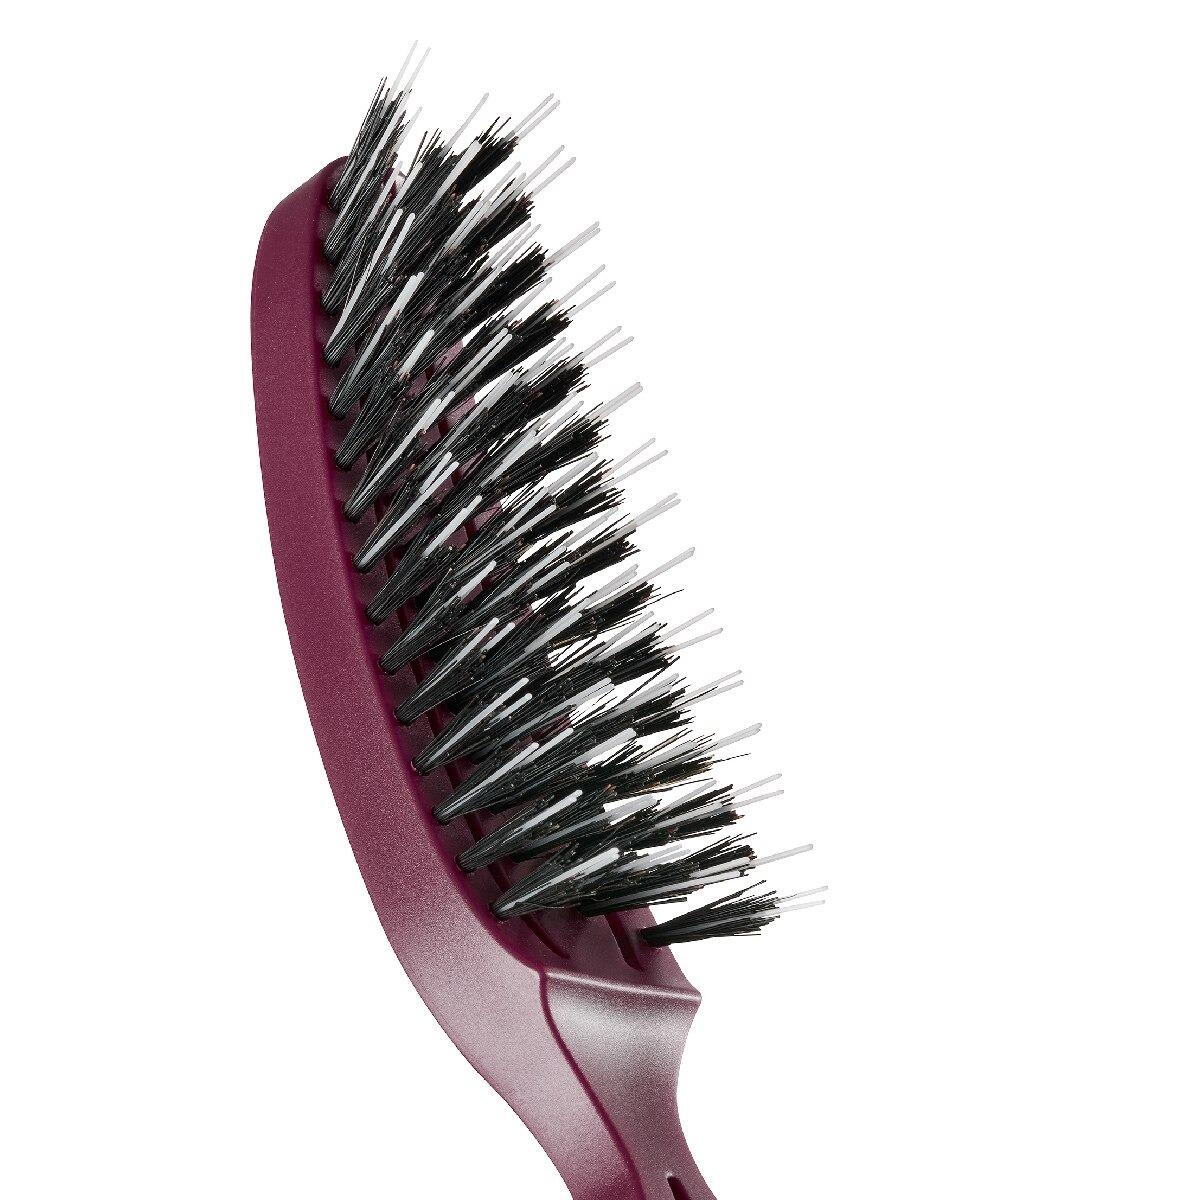 ACCA KAPPA Soft Airy brush collection - red